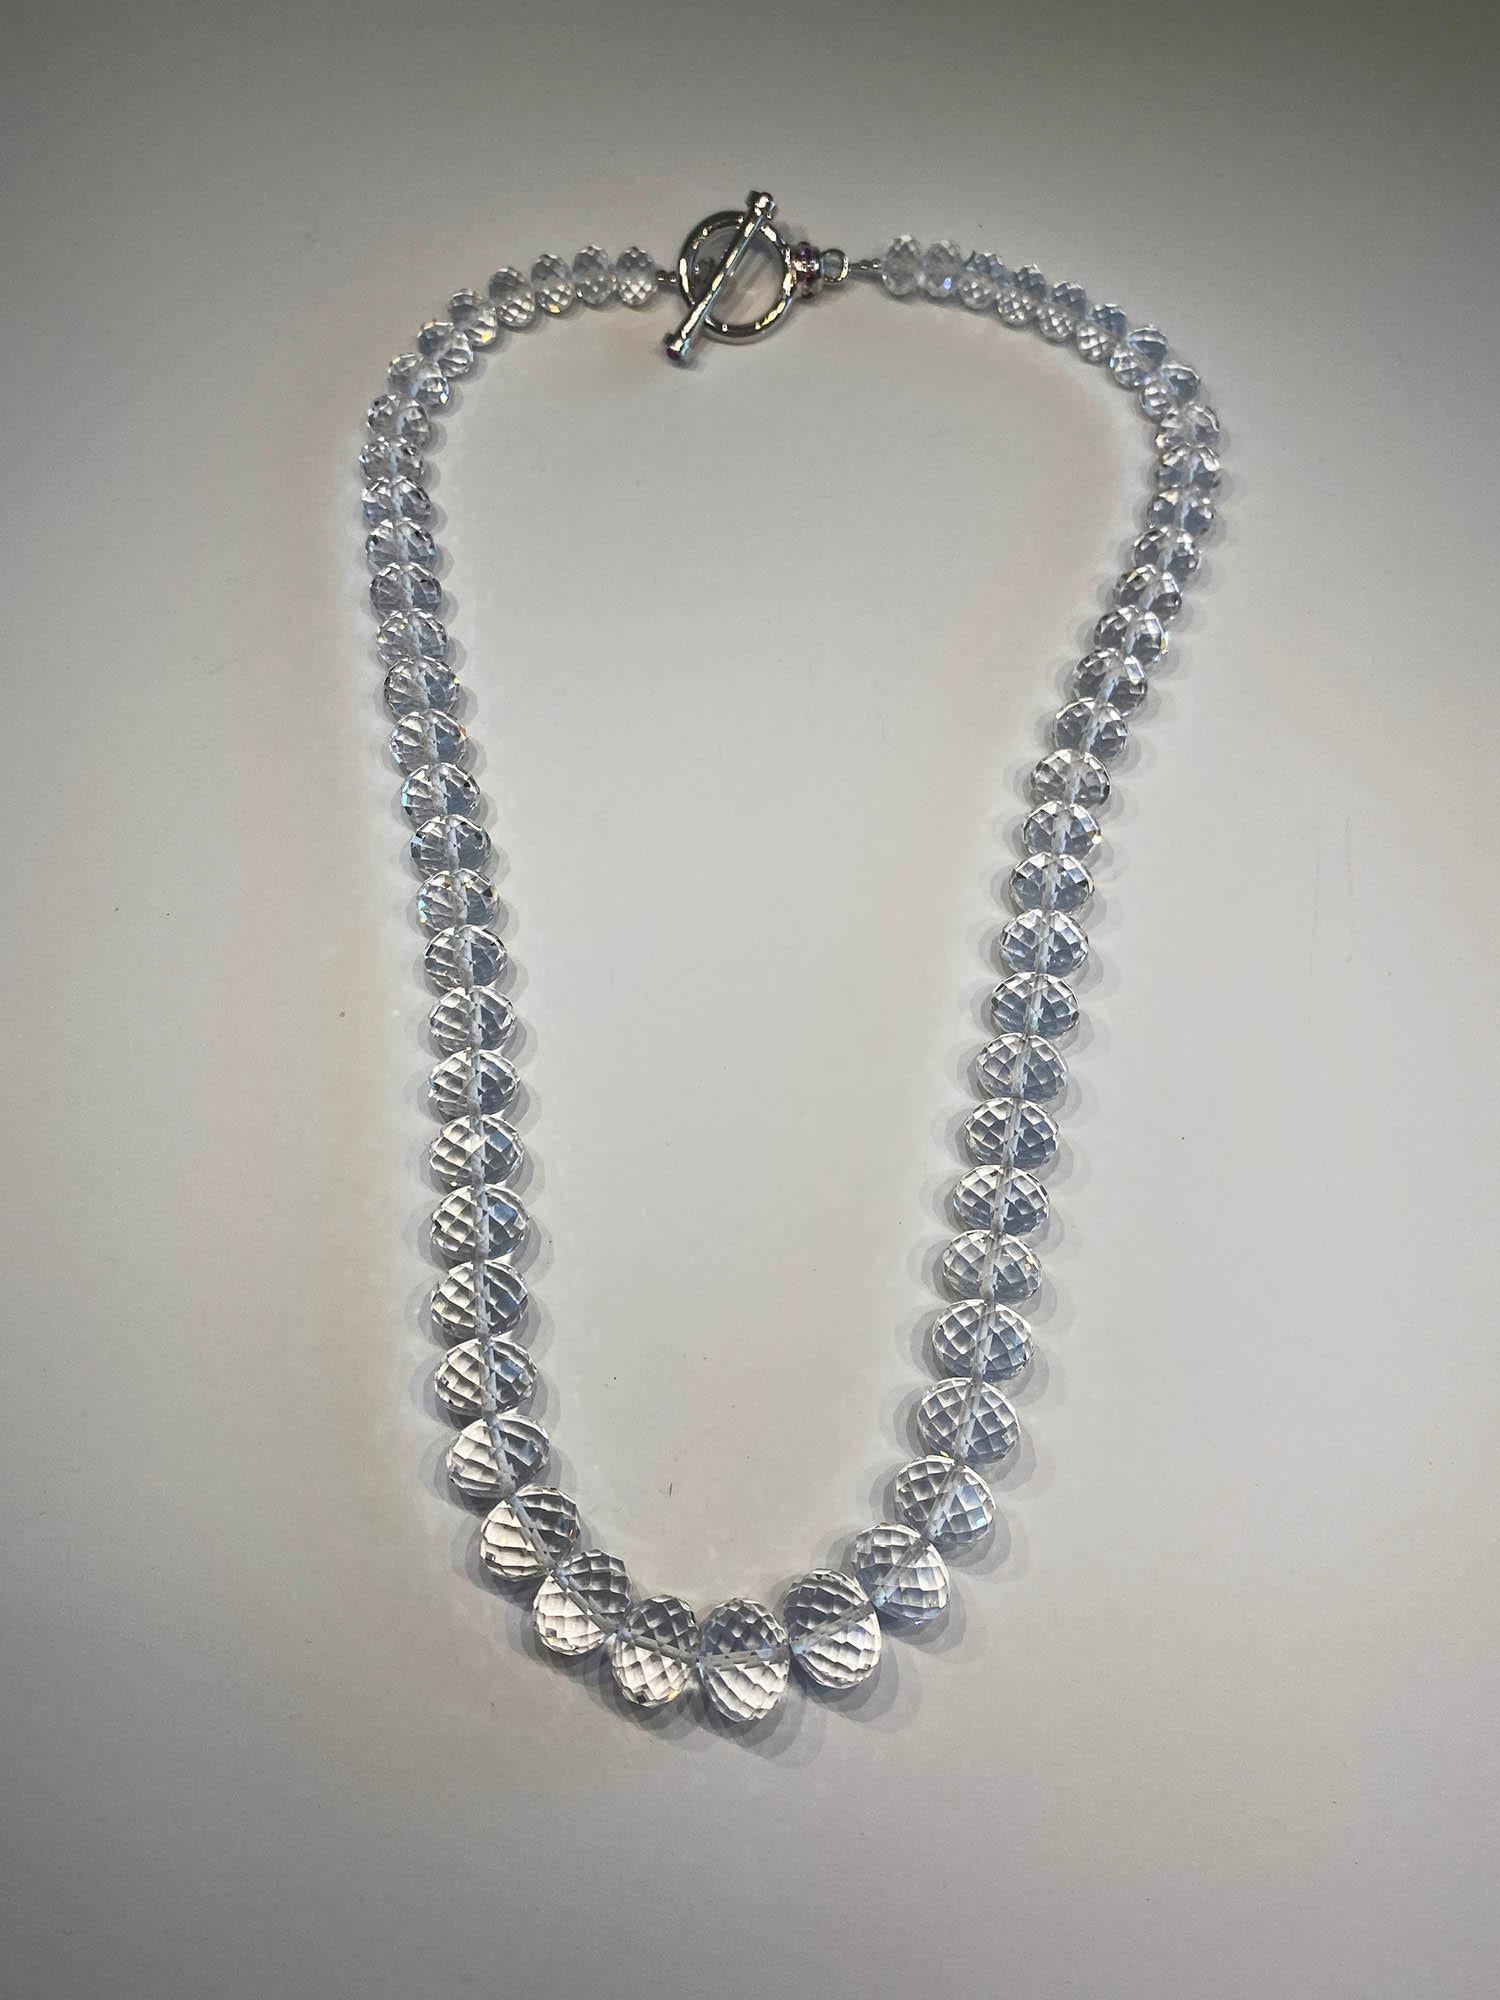 Kary Adam Designed, White Quartz Rondelle Beaded Necklace with a Silver T-Bar Clasp. Clasp is set with lovely delicate Pink Tourmaline Cabochons.

Originally from San Diego, California, Kary Adam lived in the “Gem Capital of the World” - Bangkok,